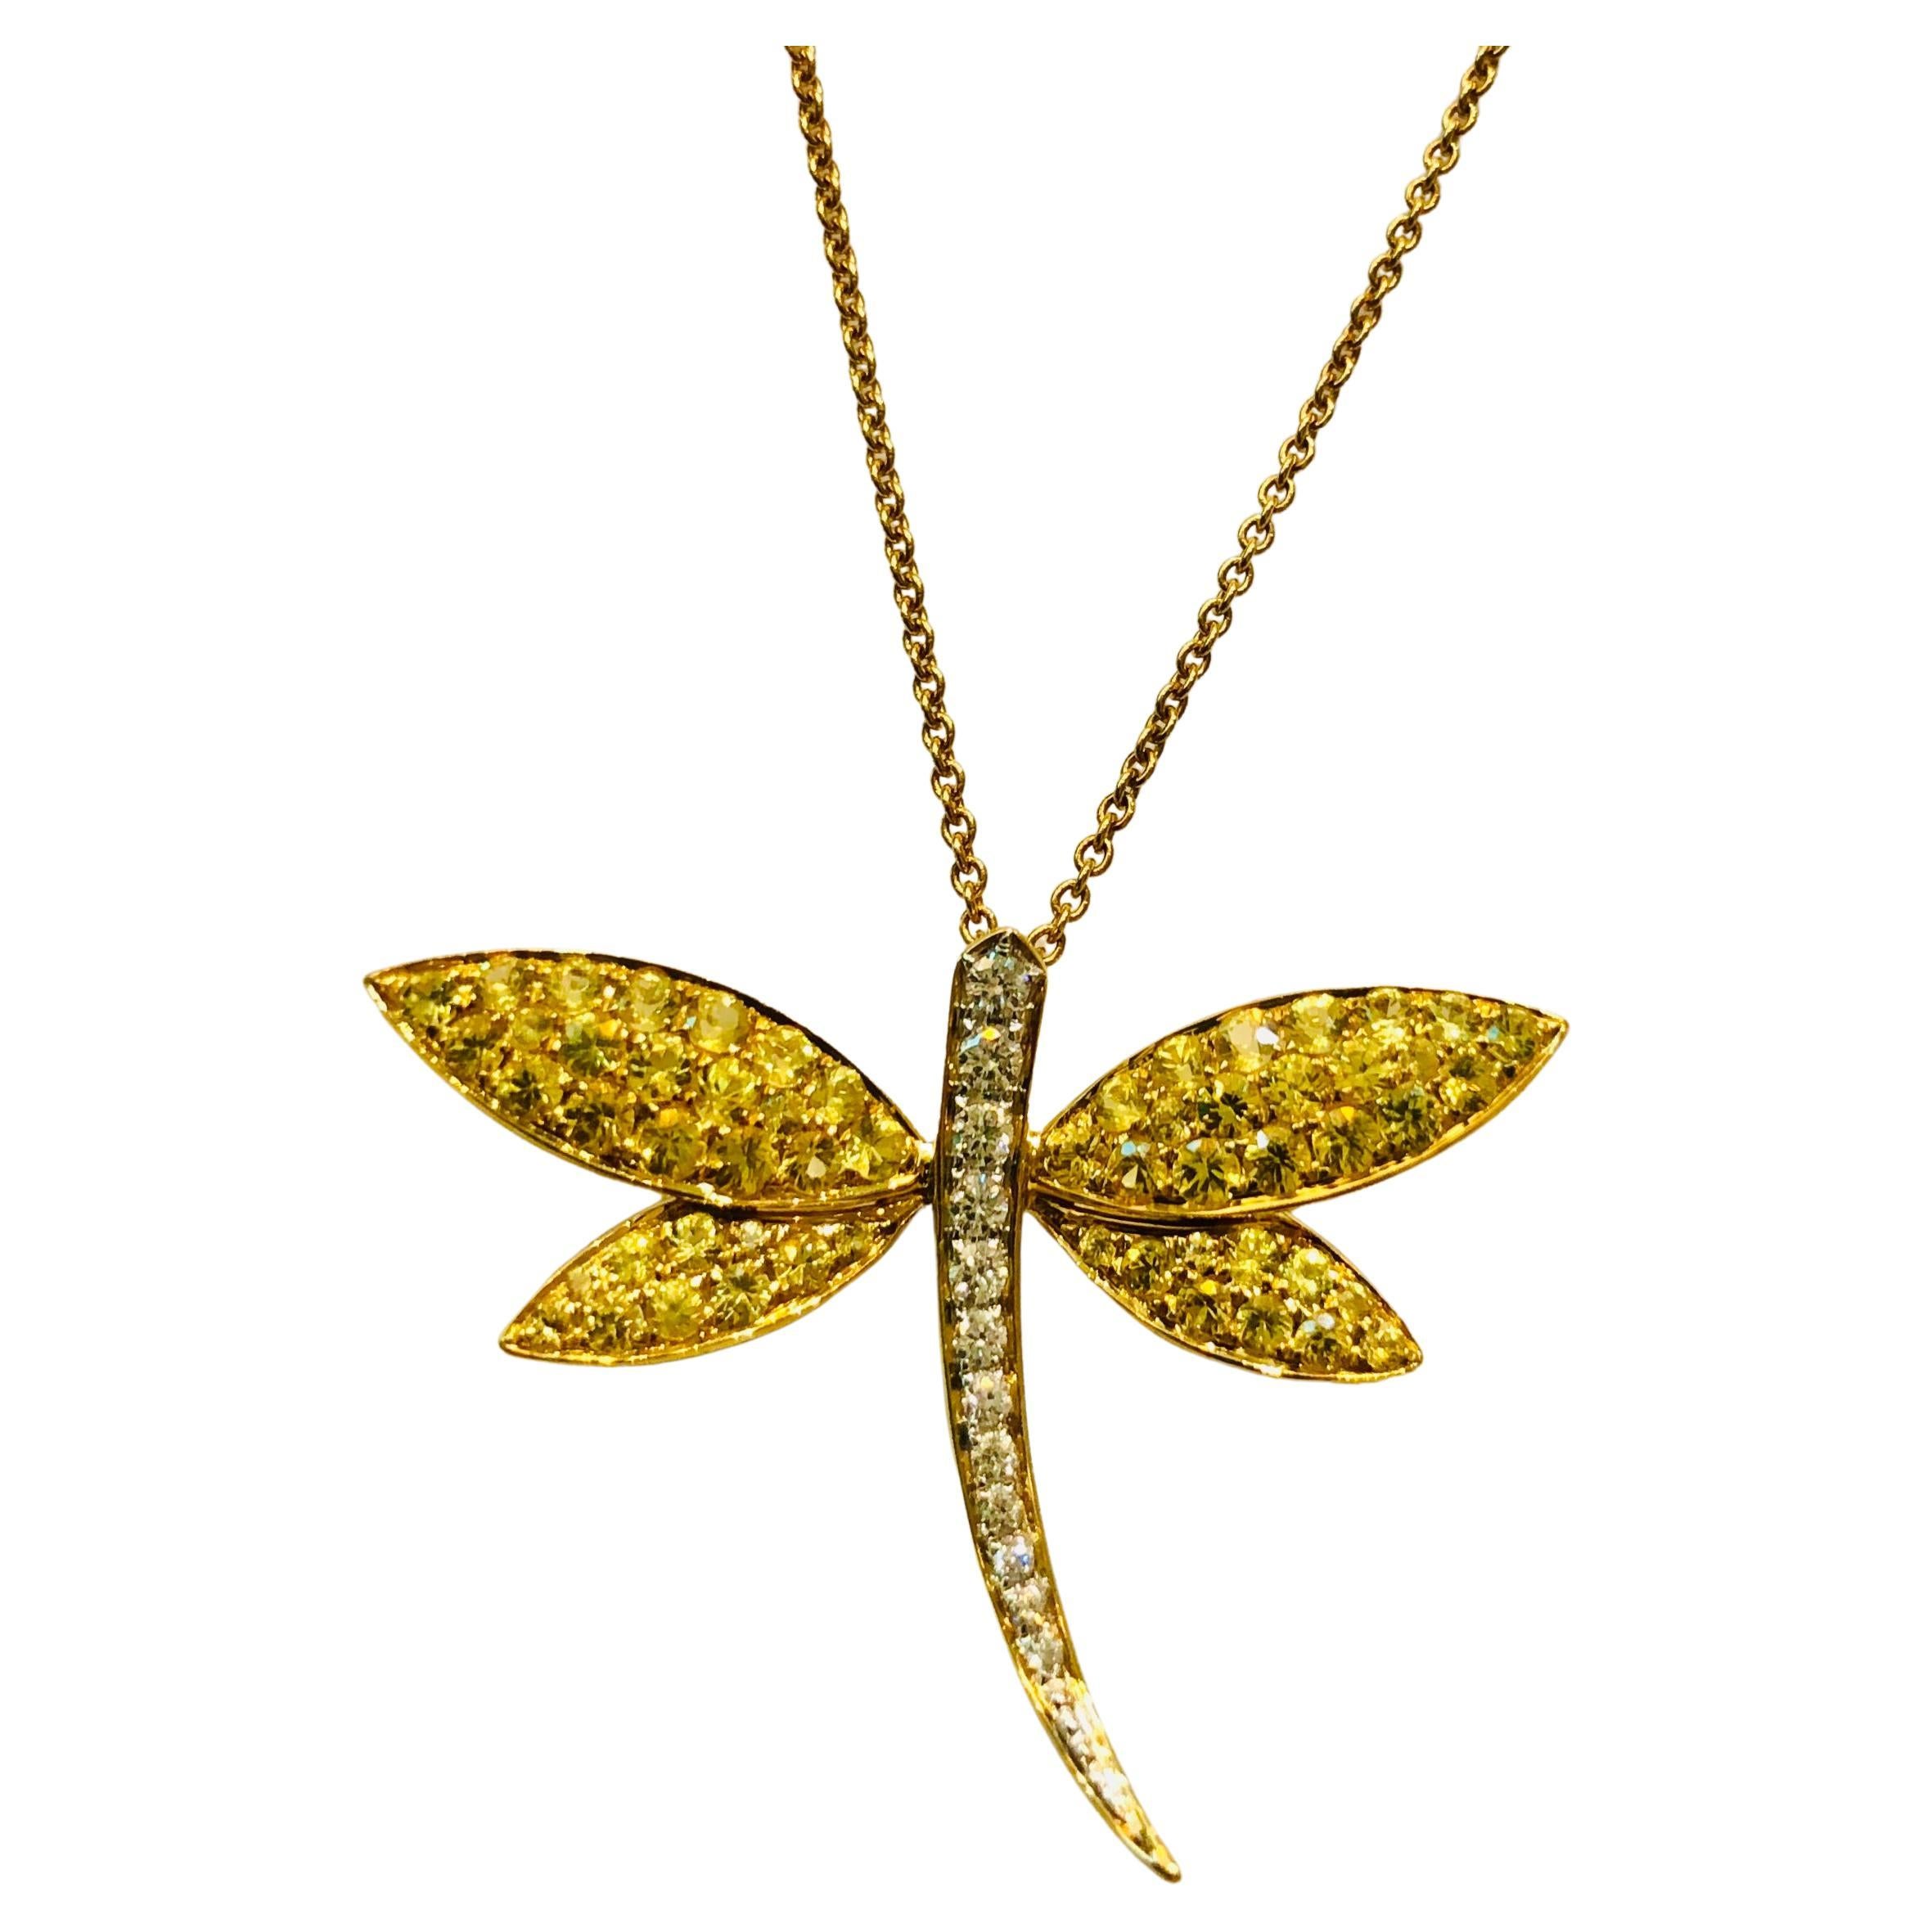 Yellow Saphires and Diamonds Dragonfly Pendant Brooche Necklace in 18k Gold